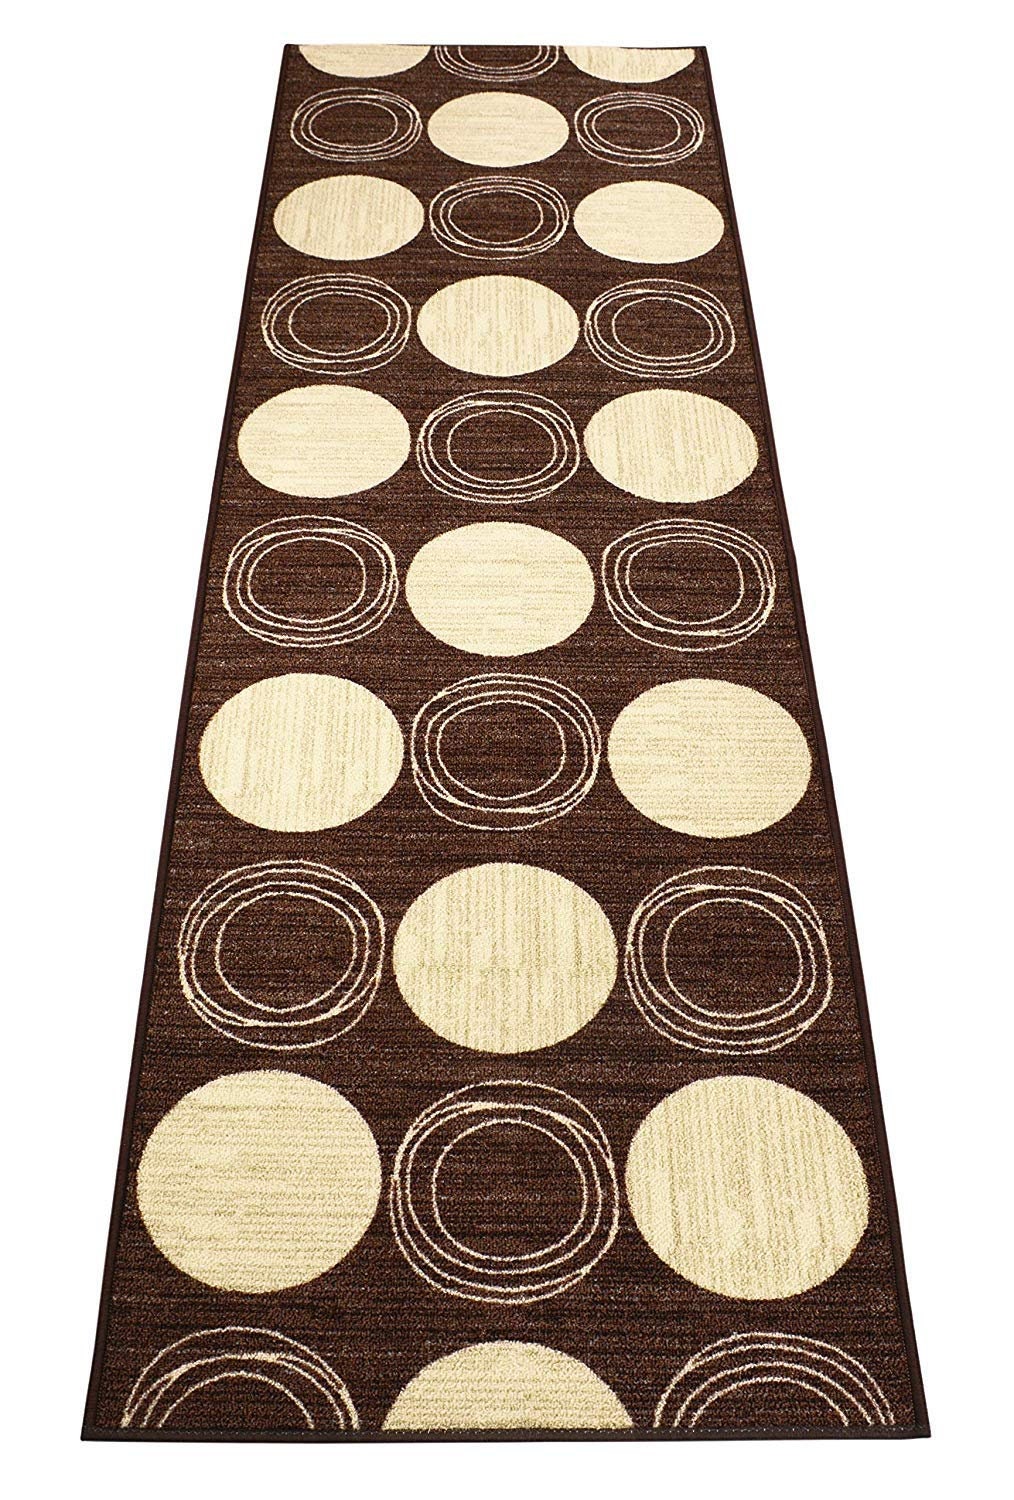 Custom Size Runner Rug Circles Geometric Abstract Brown Cream Skid Resistant Runner Rug Cut To Size Non Slip Runner Rug Customize By Feet